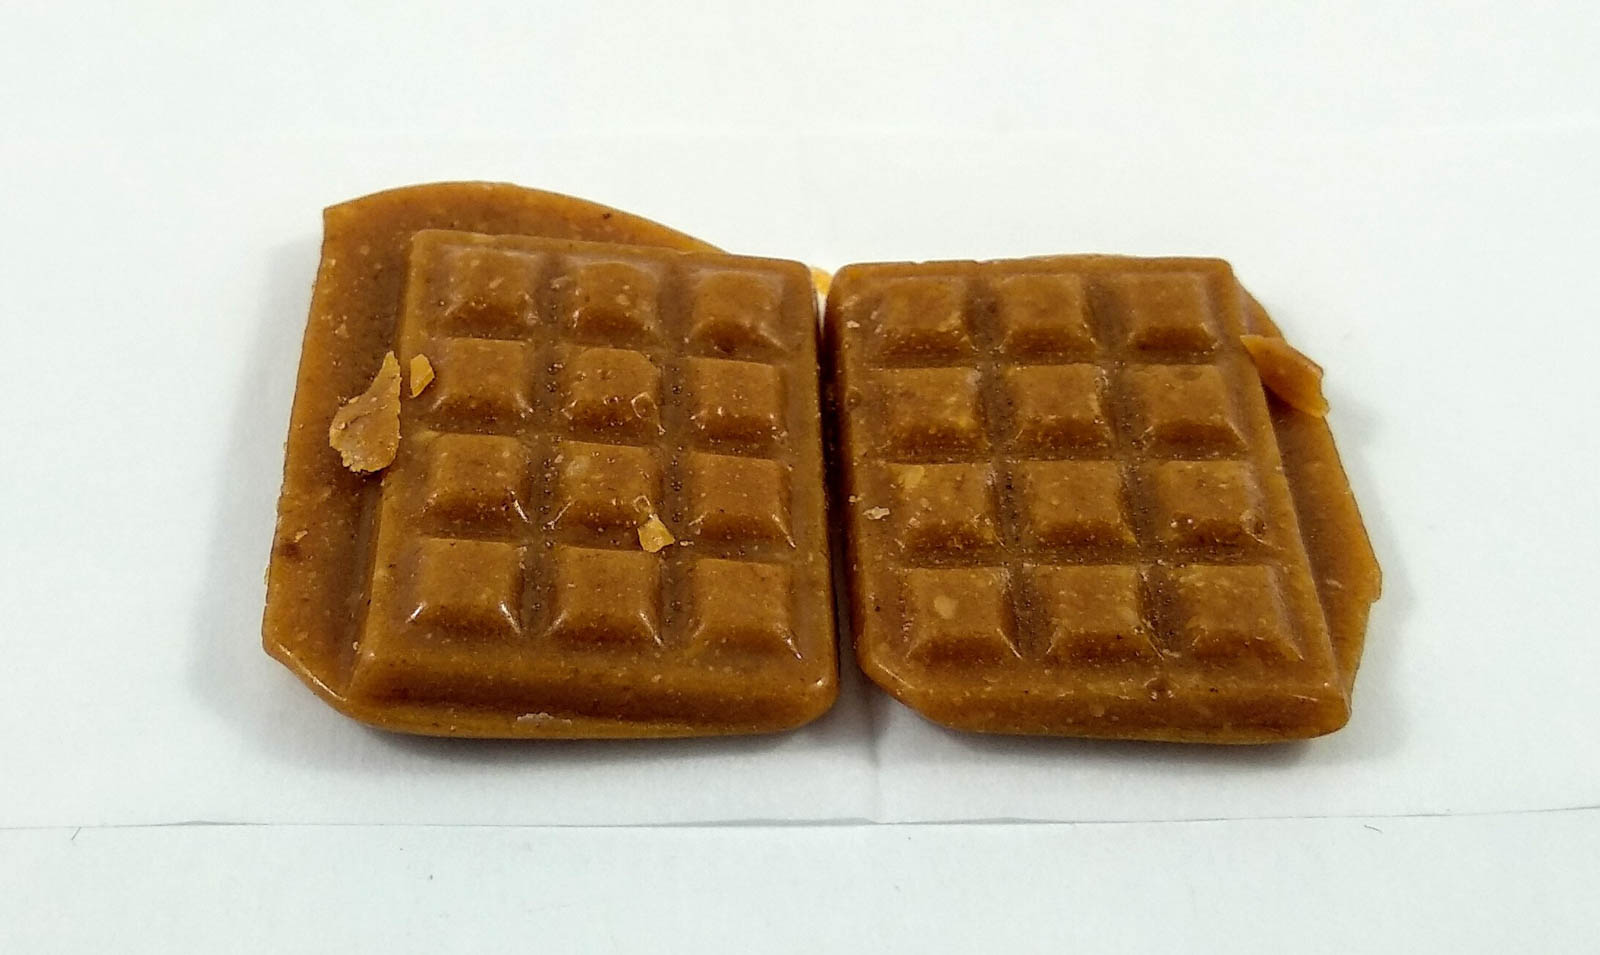 The Baked Shop Caramel Candy (40mg THC)